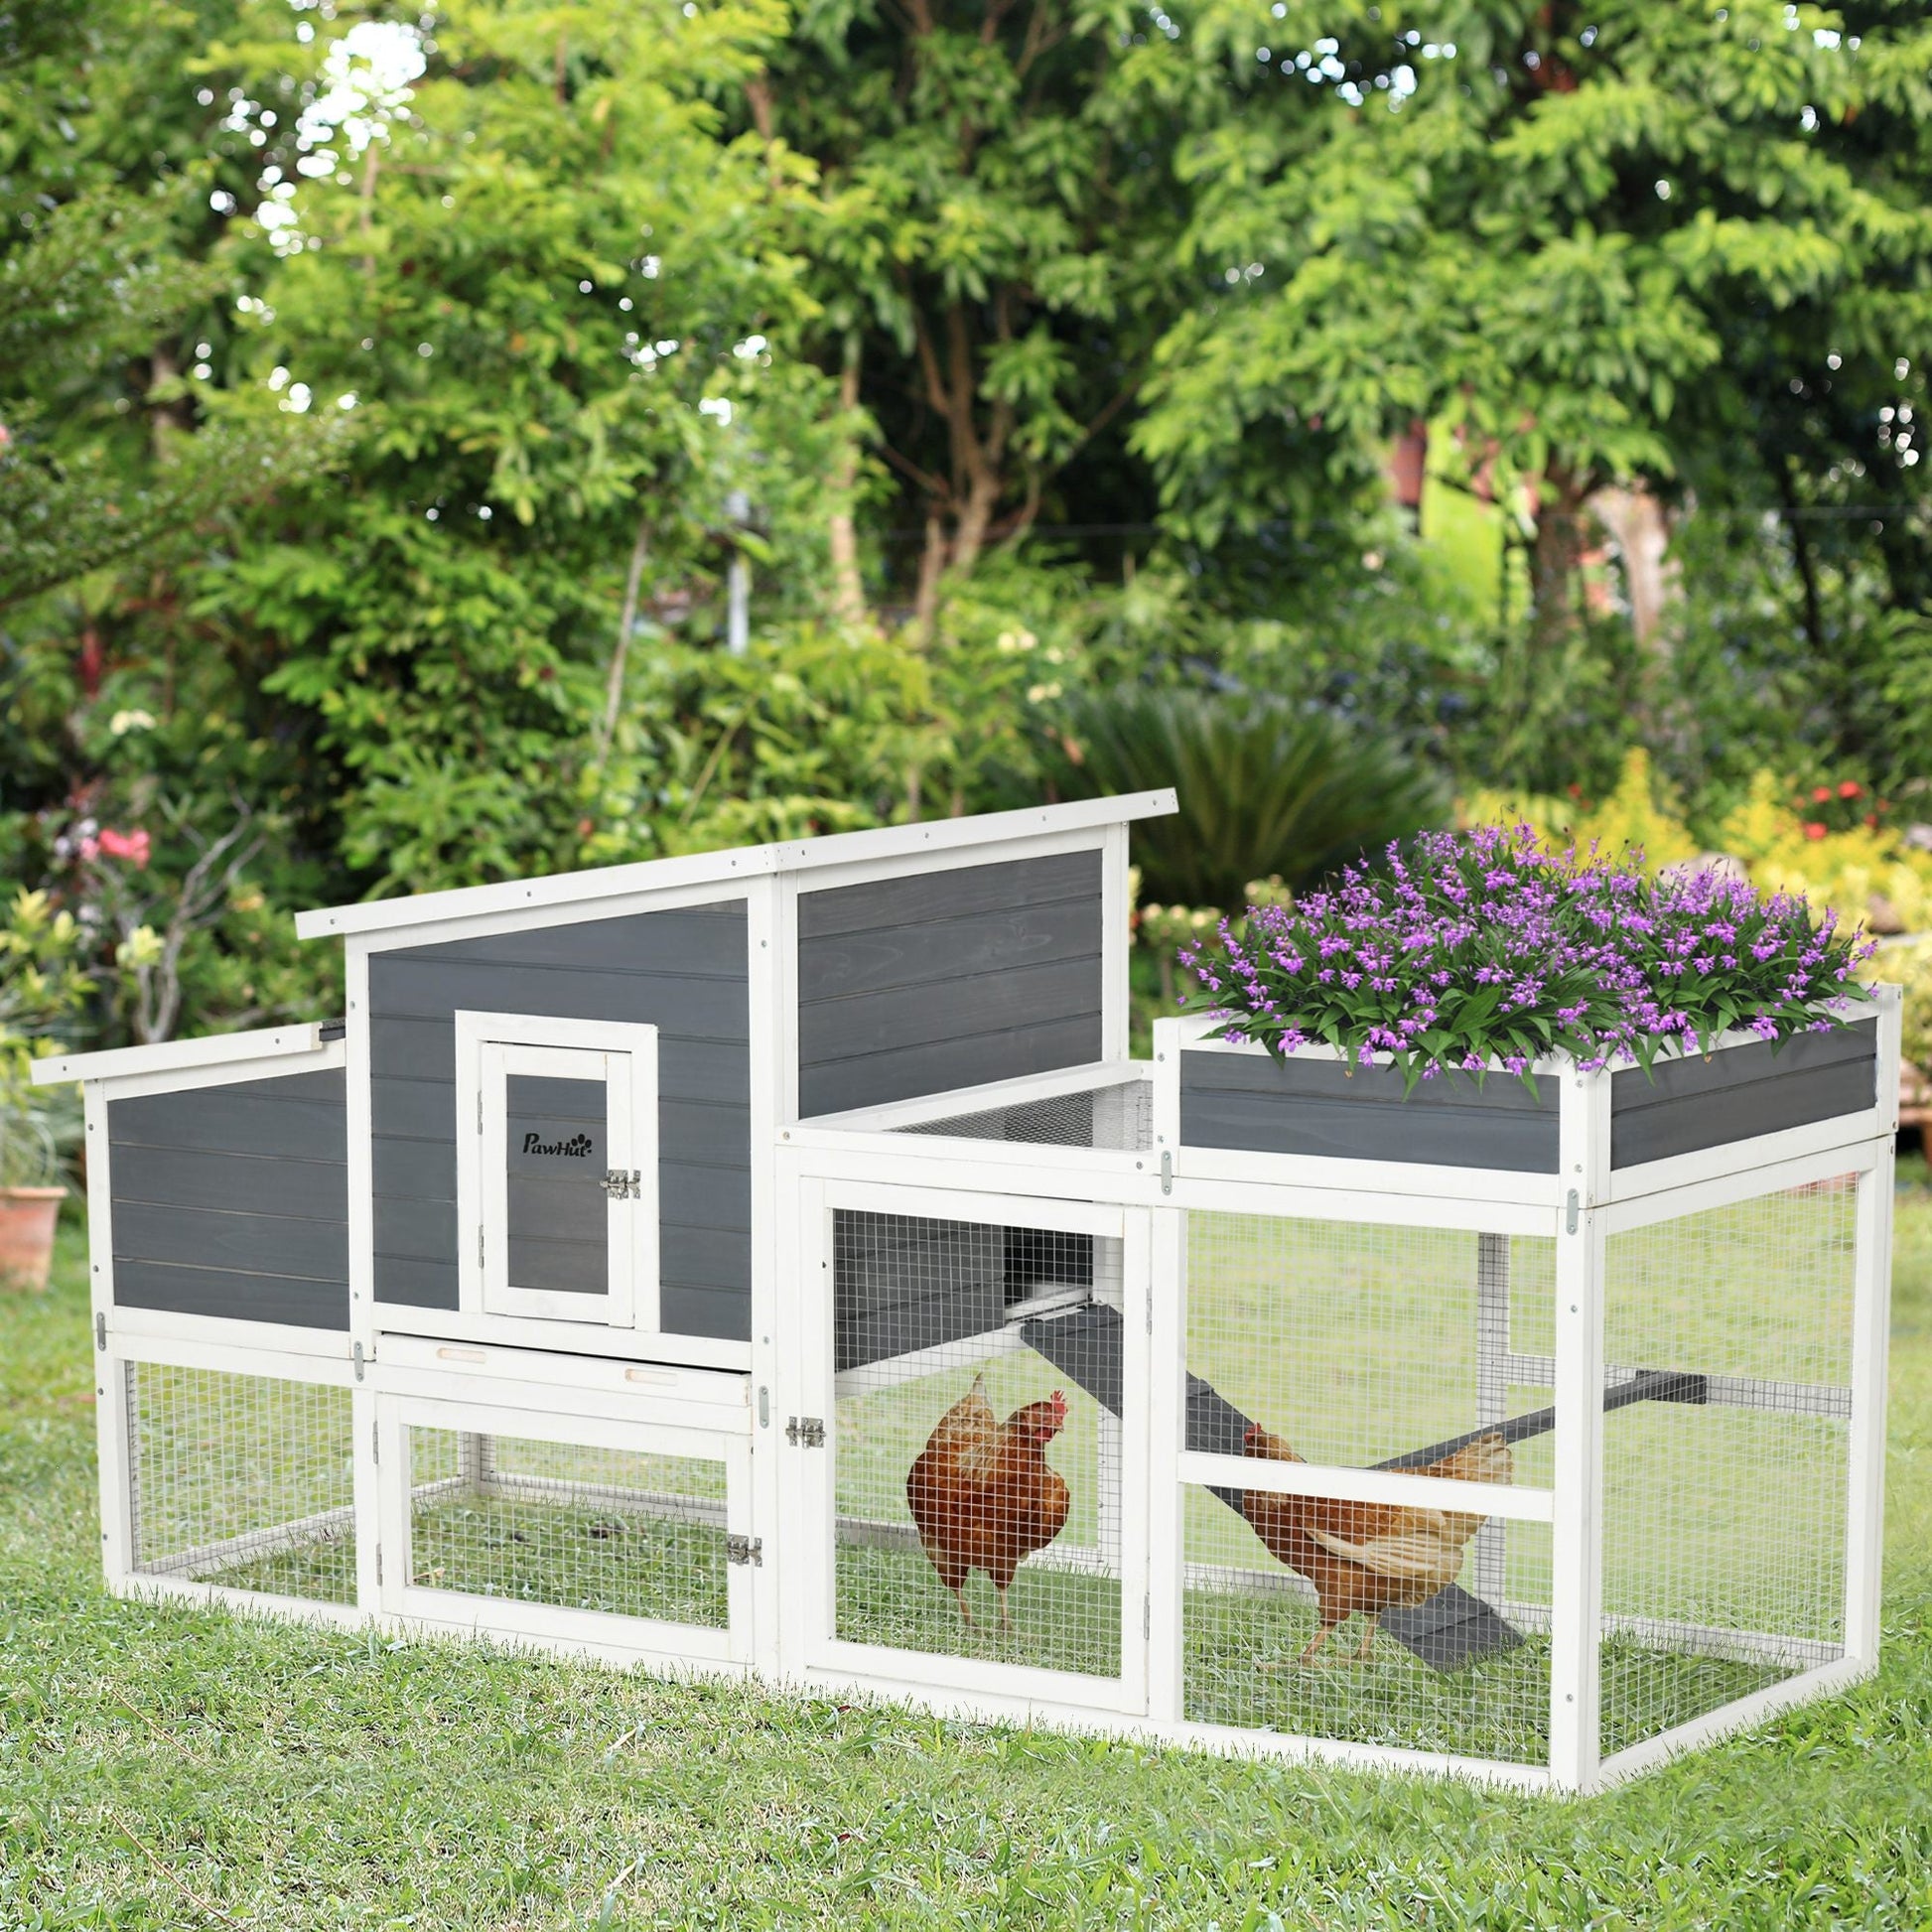 76" Wooden Chicken Coop, Outdoor Hen House Poultry Cage with Plant Box, Openable Roof, Outdoor Run, Nesting Box, Removable Tray and Lockable Doors, Grey at Gallery Canada